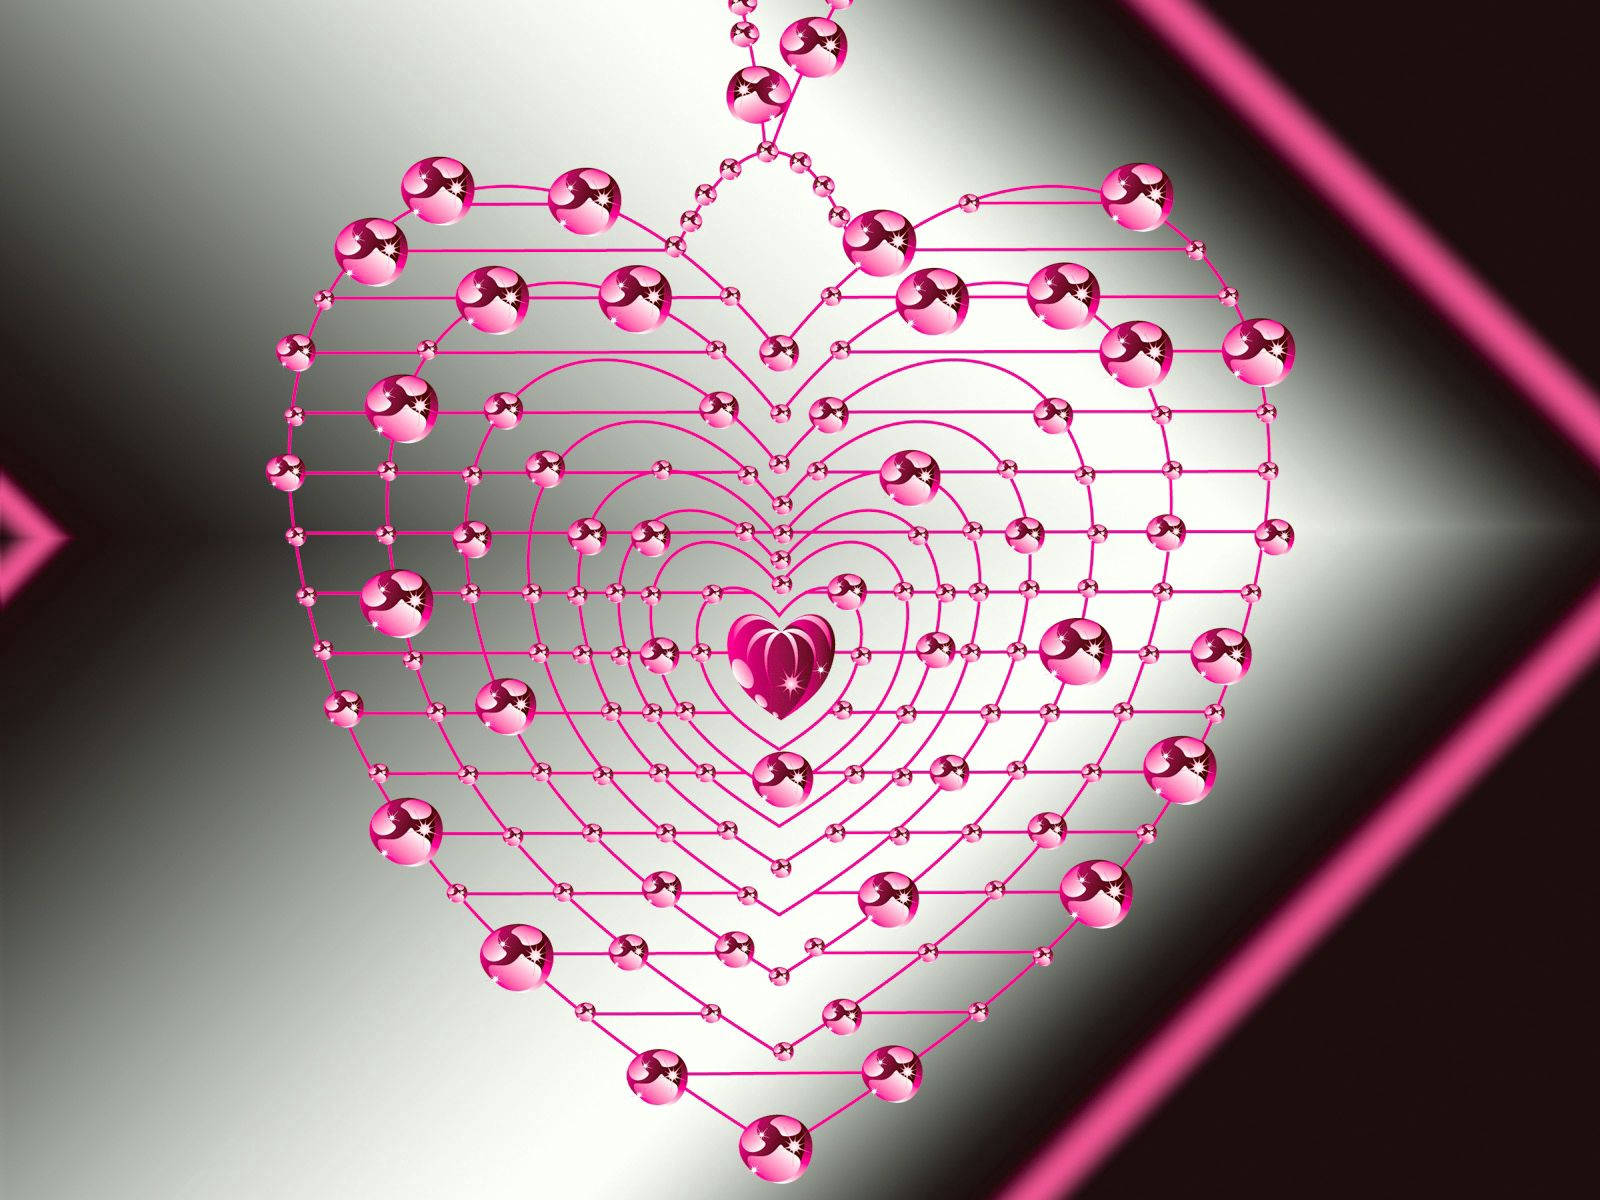 Spread love and happiness with this heart-shaped glitter in pink Wallpaper